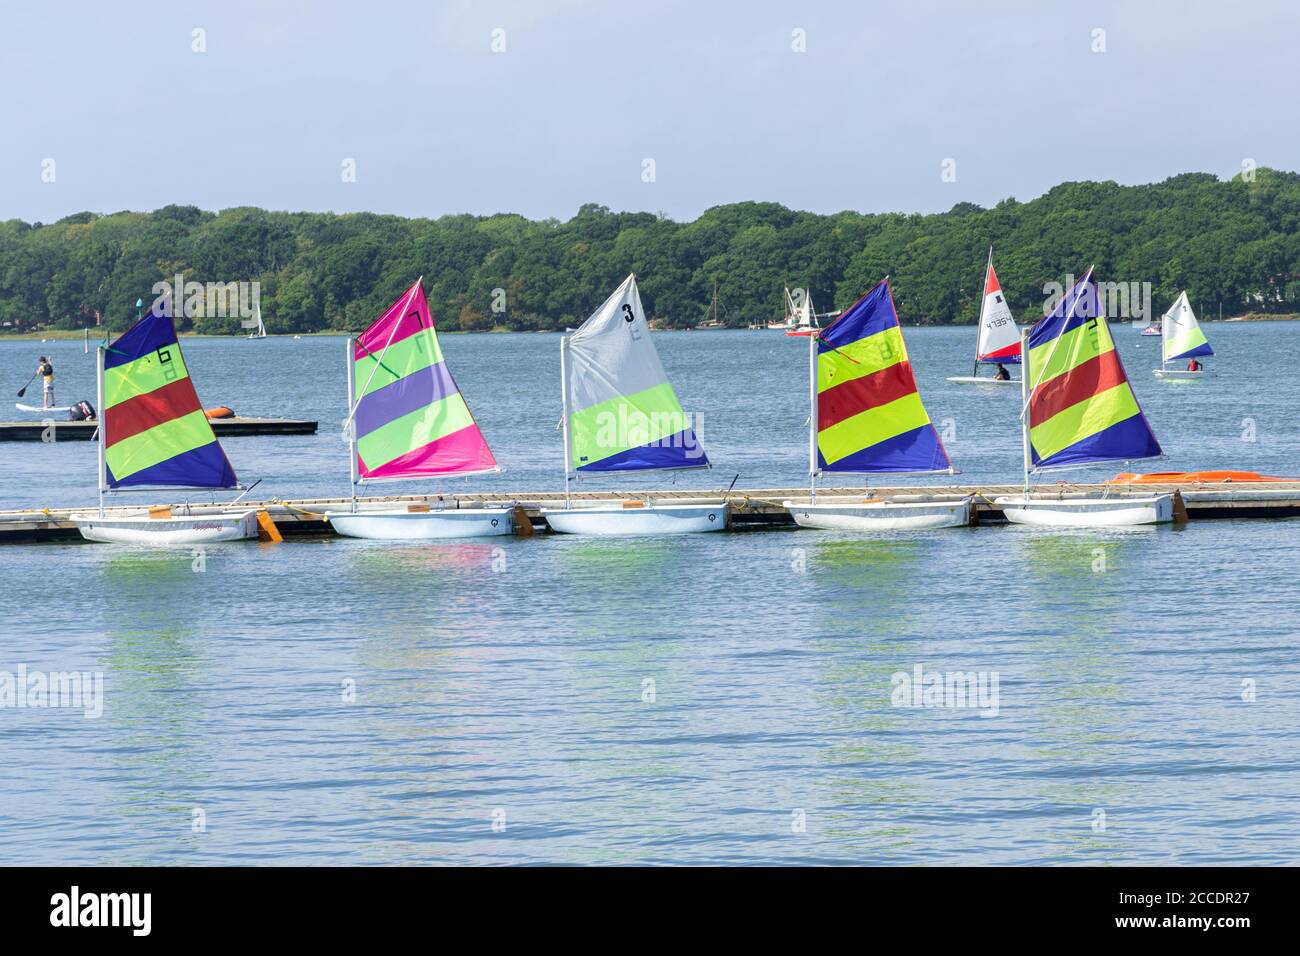 Sailing dinghies or boats with colourful sails lined up in Chichester Harbour, West Sussex, UK Stock Photo